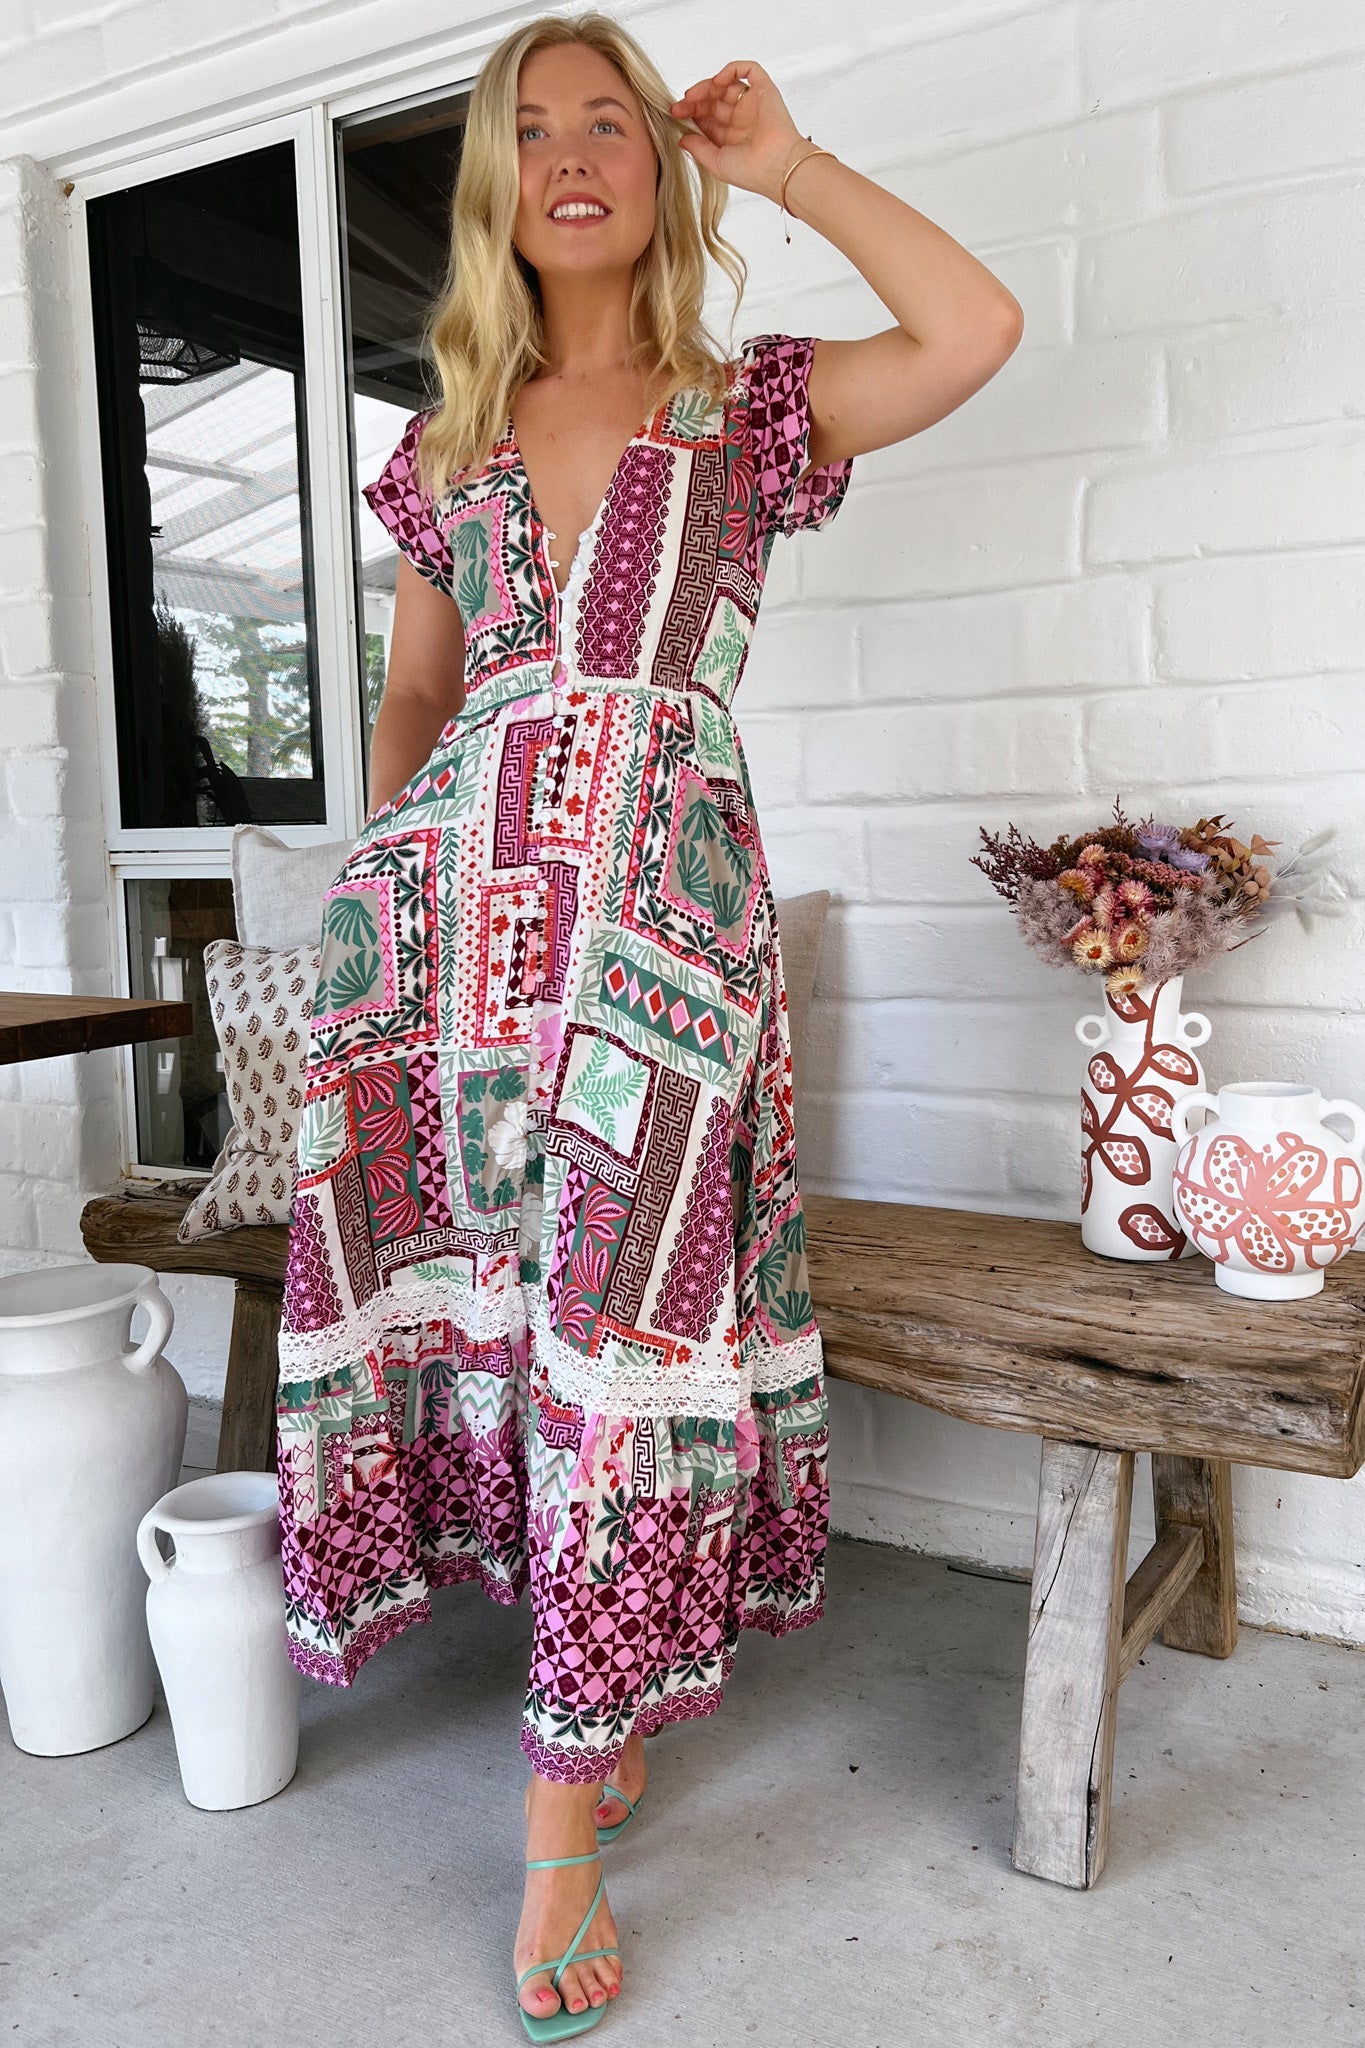 JAASE - Carmen Maxi Dress: Butterfly Cap Sleeve Button Down A Line Dress with Lace Trim in Aelia Print